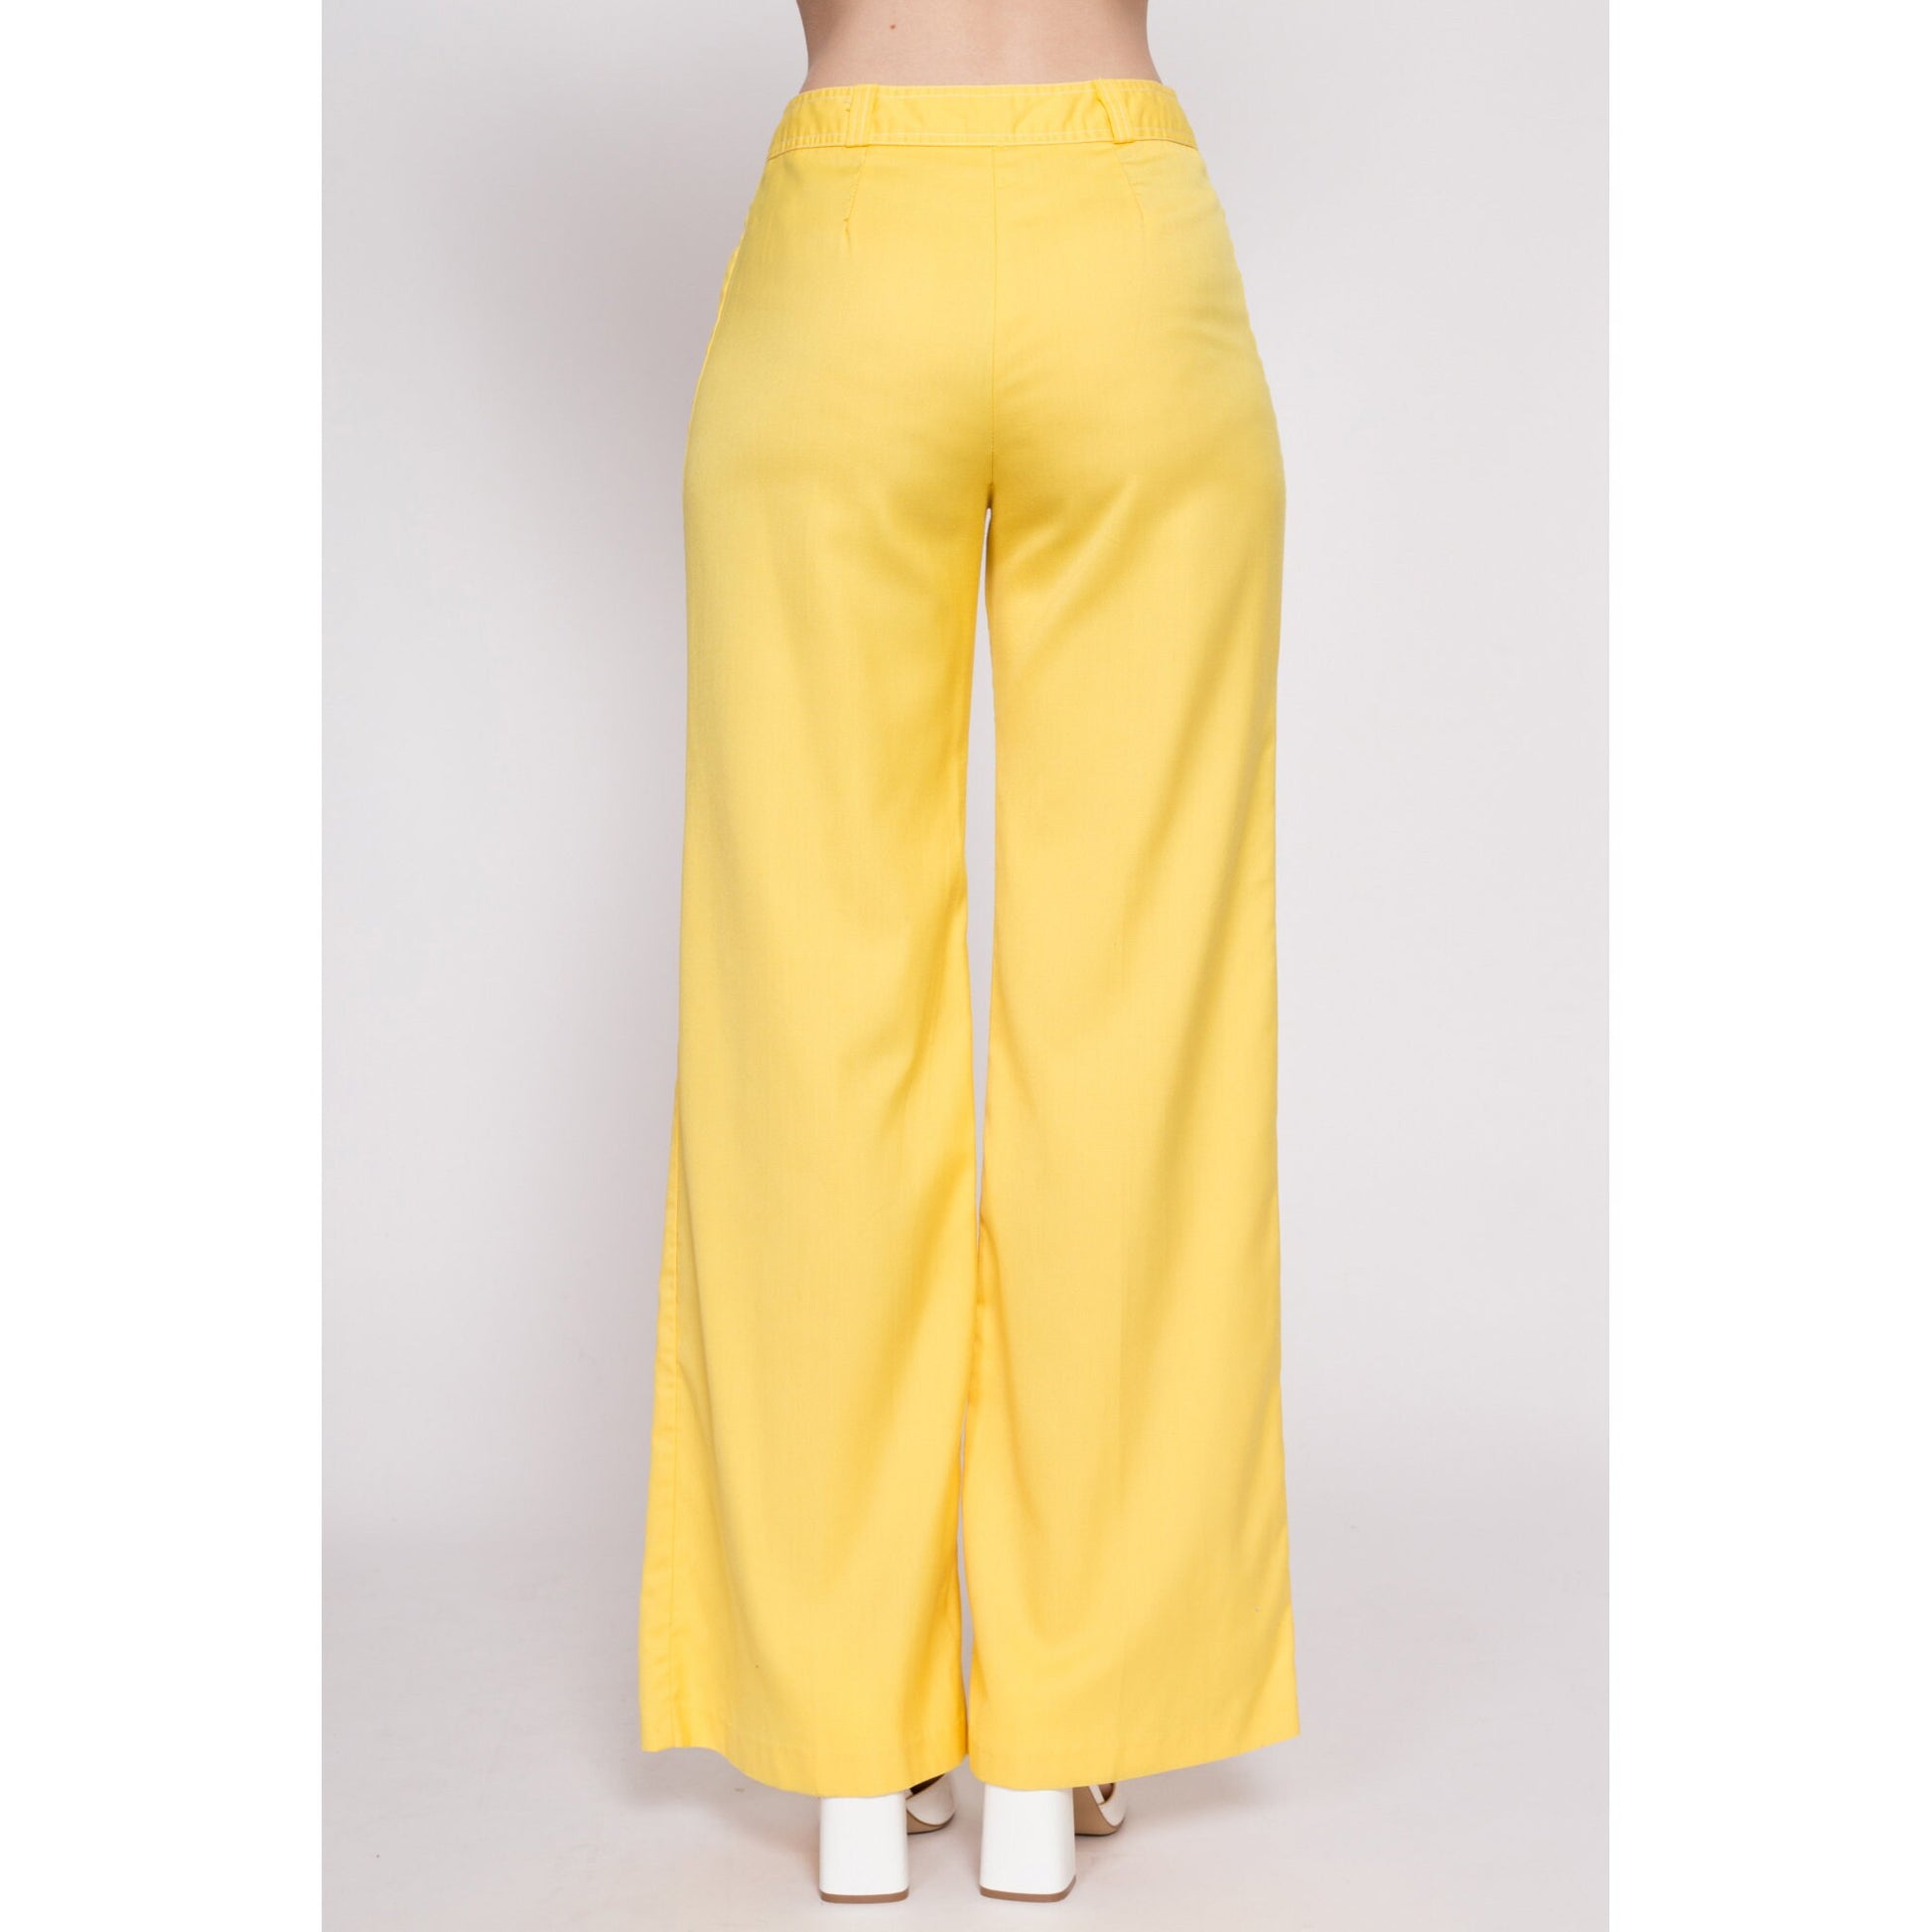 70s Yellow Flared Pants - Small, 26.5" | Vintage High Waisted Retro Disco Trousers